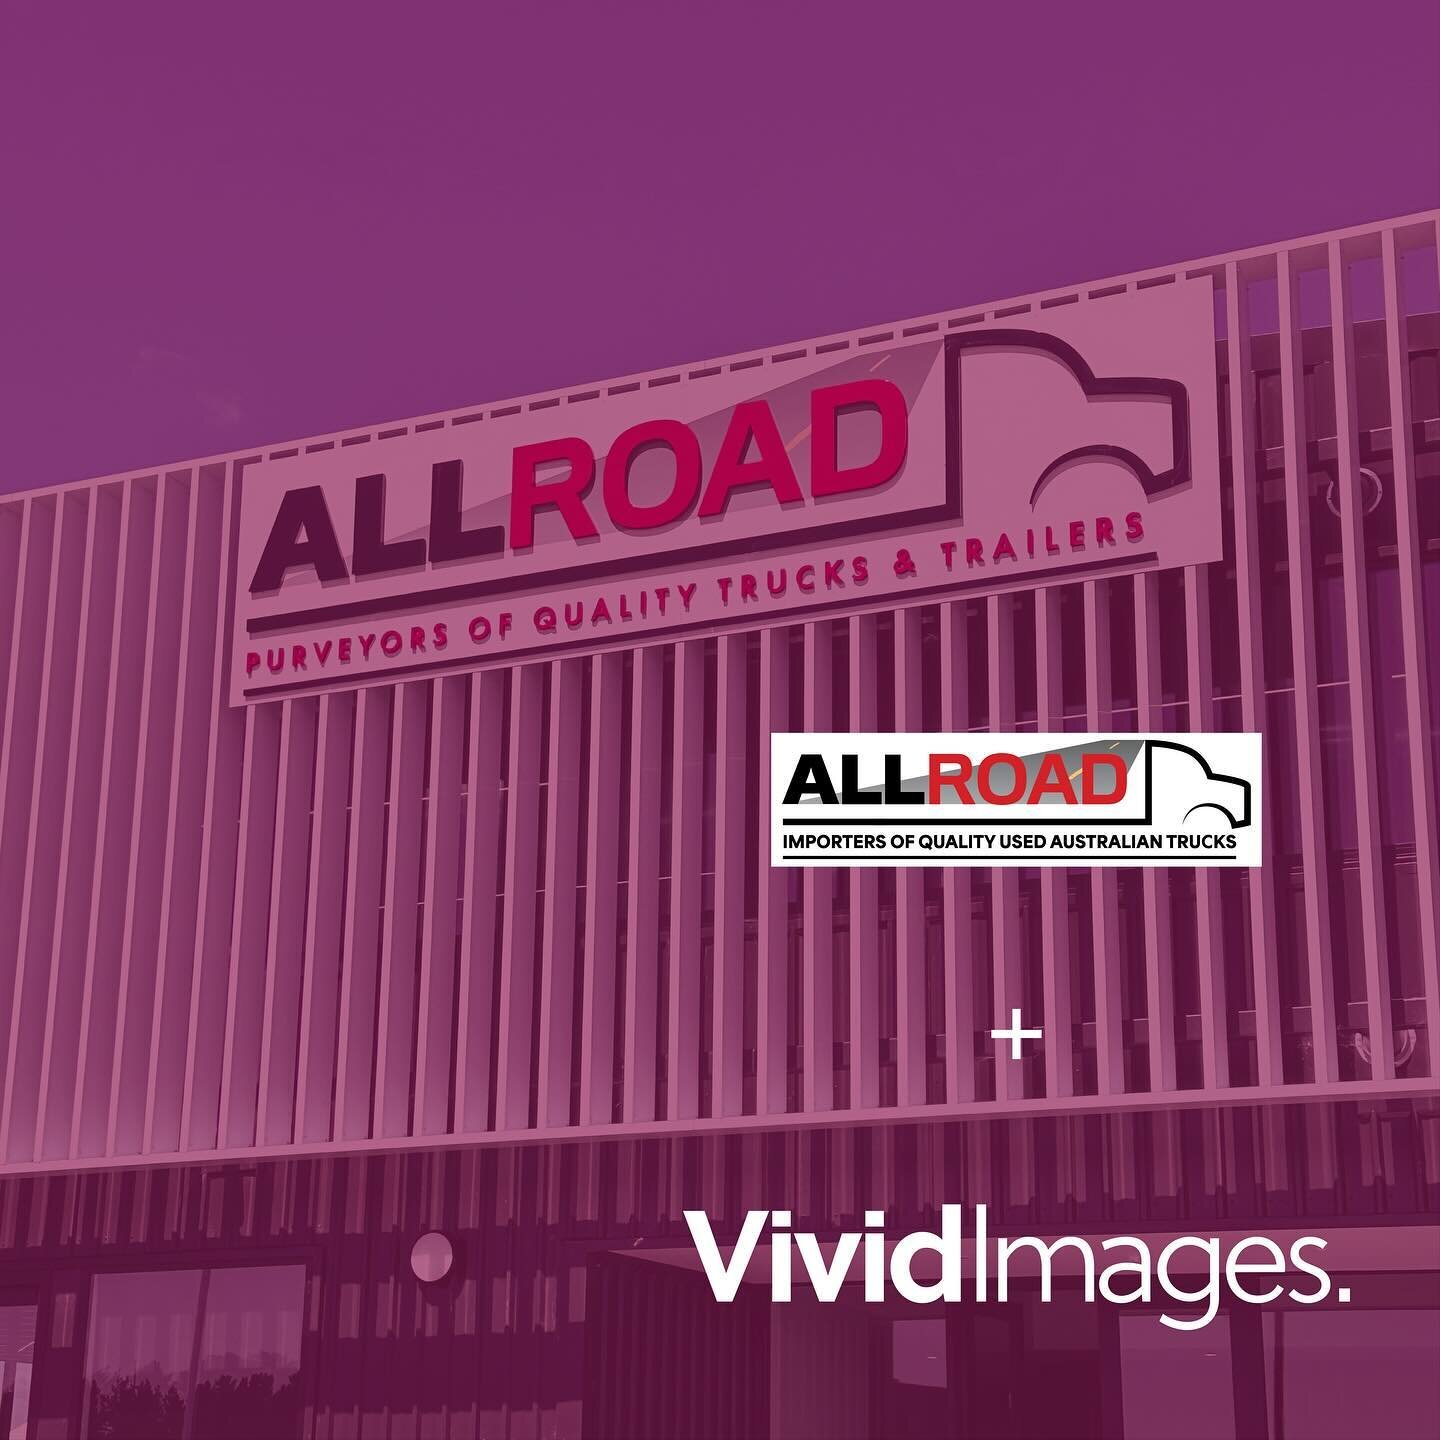 Some fresh new signage for AllRoad Limited. The striking 3D letters make it hard to miss from the road! #AllRoadLimited #vividimagesltd #vividimages